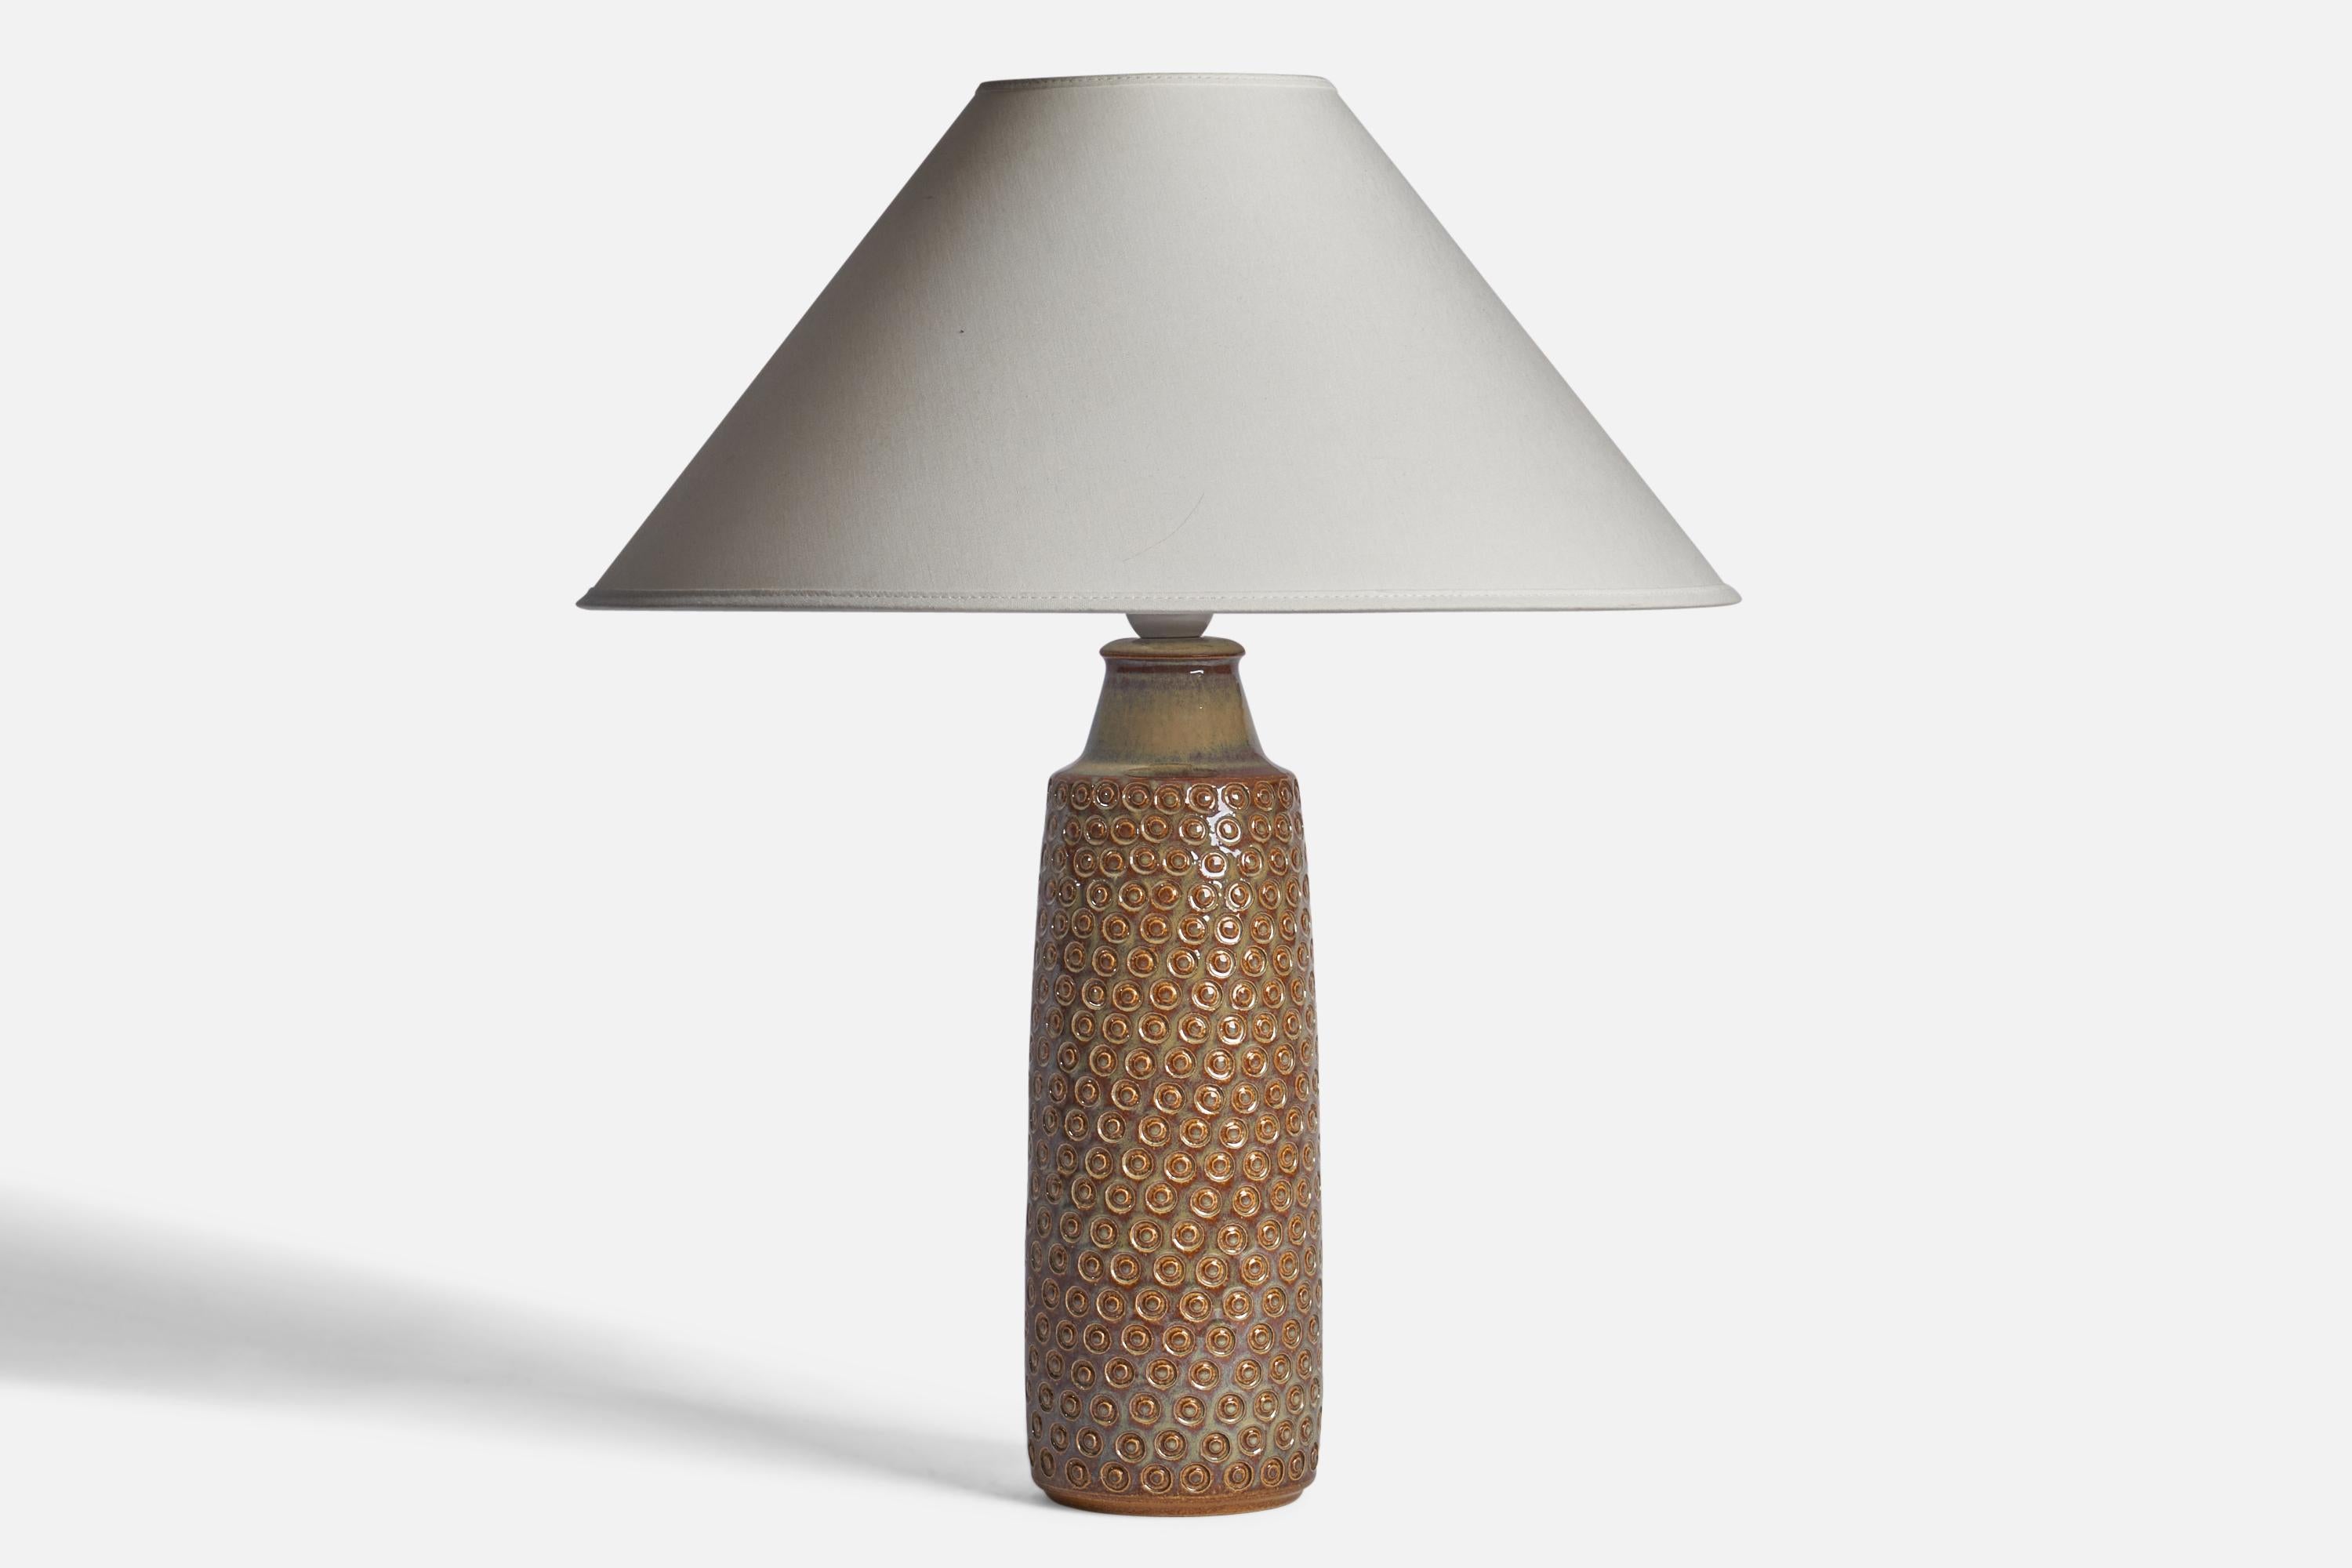 A brown-glazed incised stoneware table lamp designed and produced by 
Søholm, Denmark, 1960s.

Dimensions of Lamp (inches): 14.85” H x 4” Diameter
Dimensions of Shade (inches): 4.5” Top Diameter x 16” Bottom Diameter x 7.25” H
Dimensions of Lamp